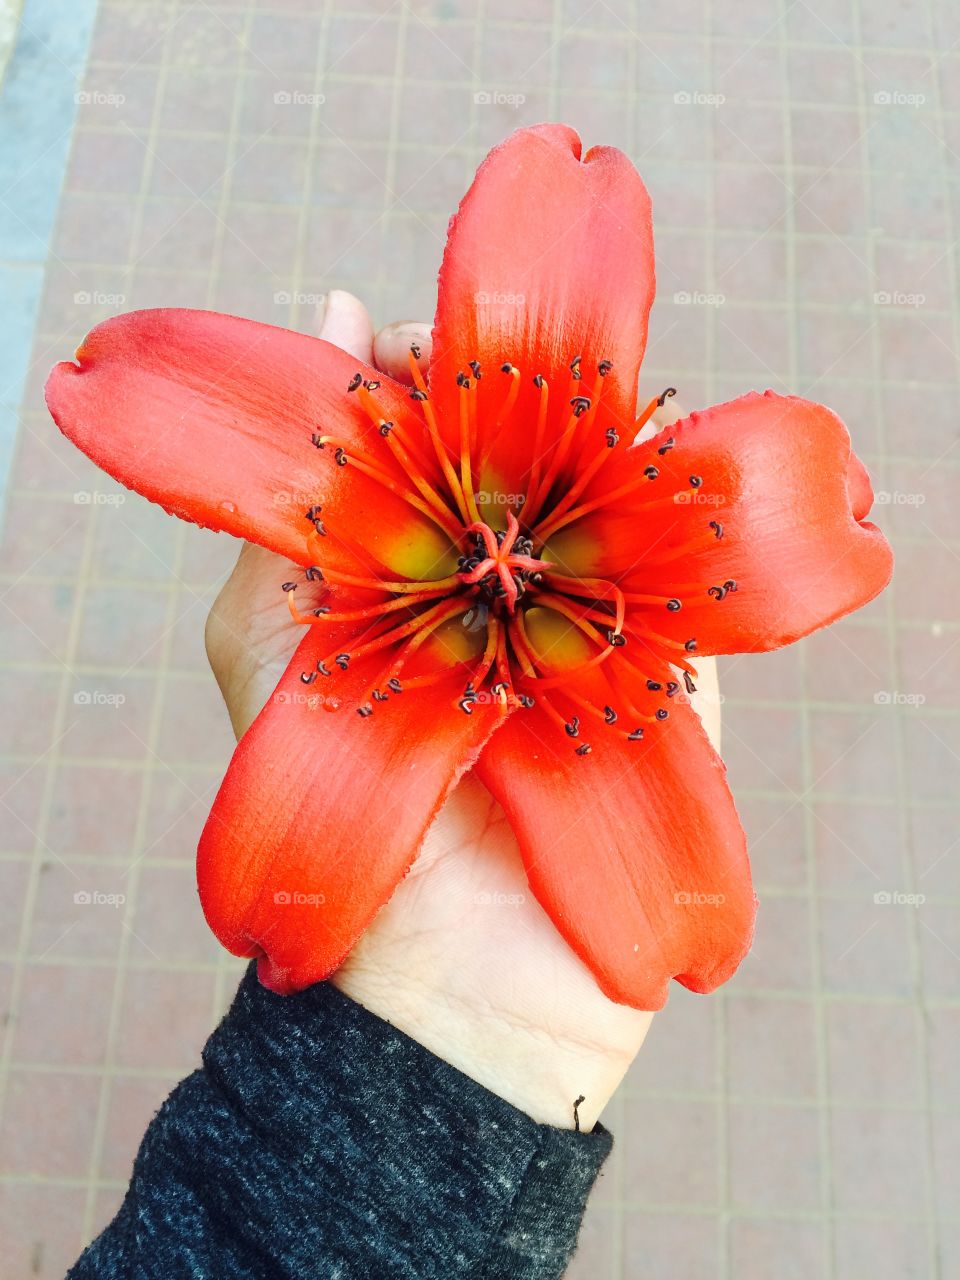 Big red flower in my hand